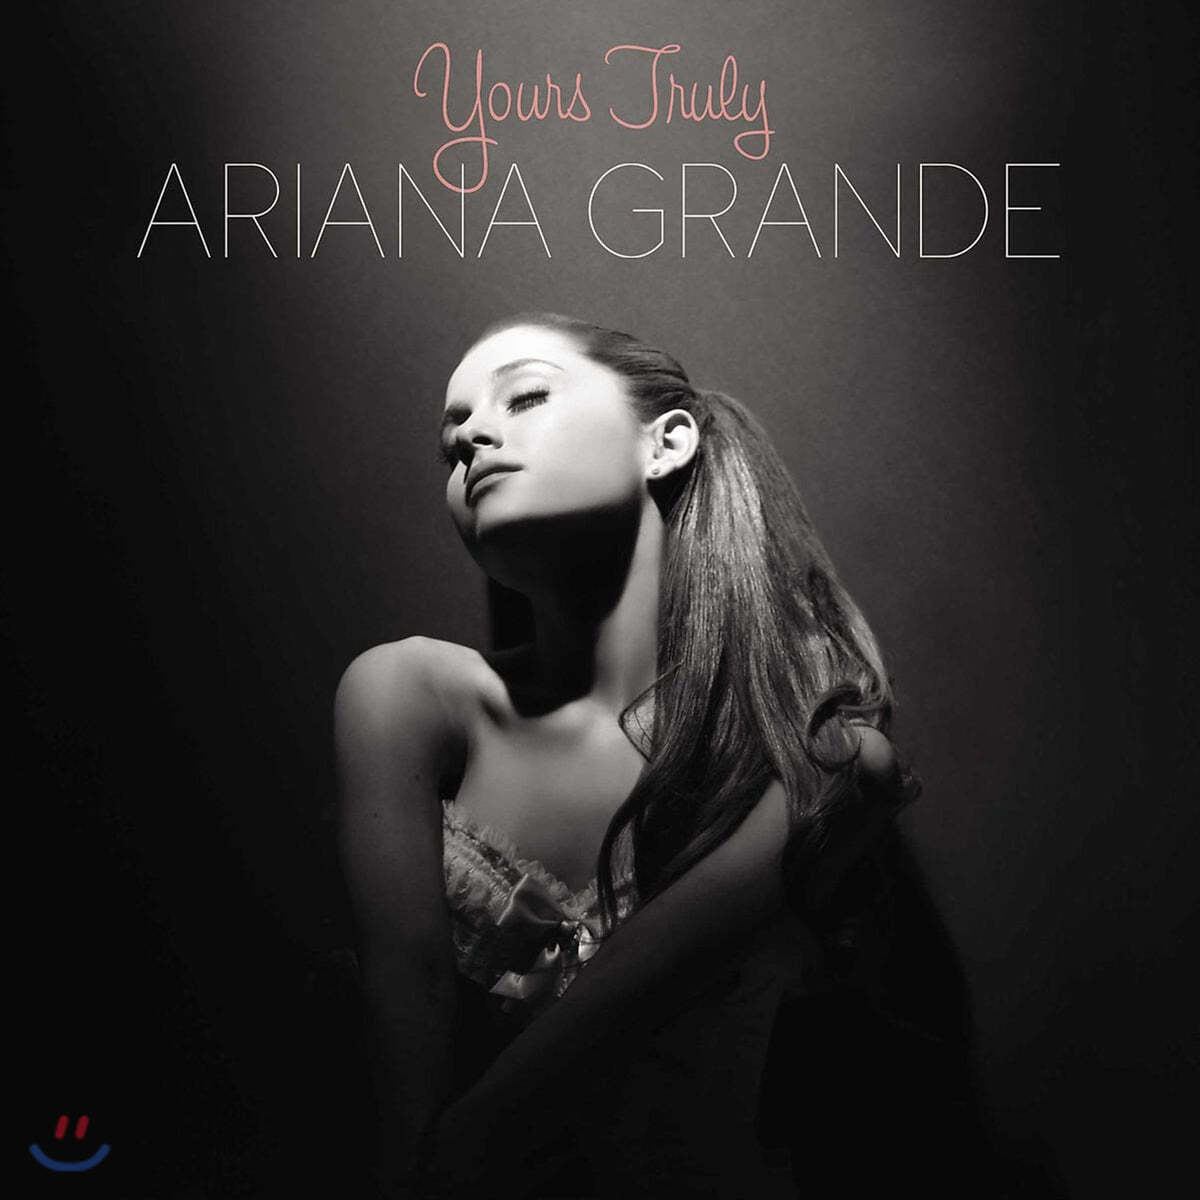 Ariana Grande 아리아나 그란데 1집 Yours Truly [lp] Yes24